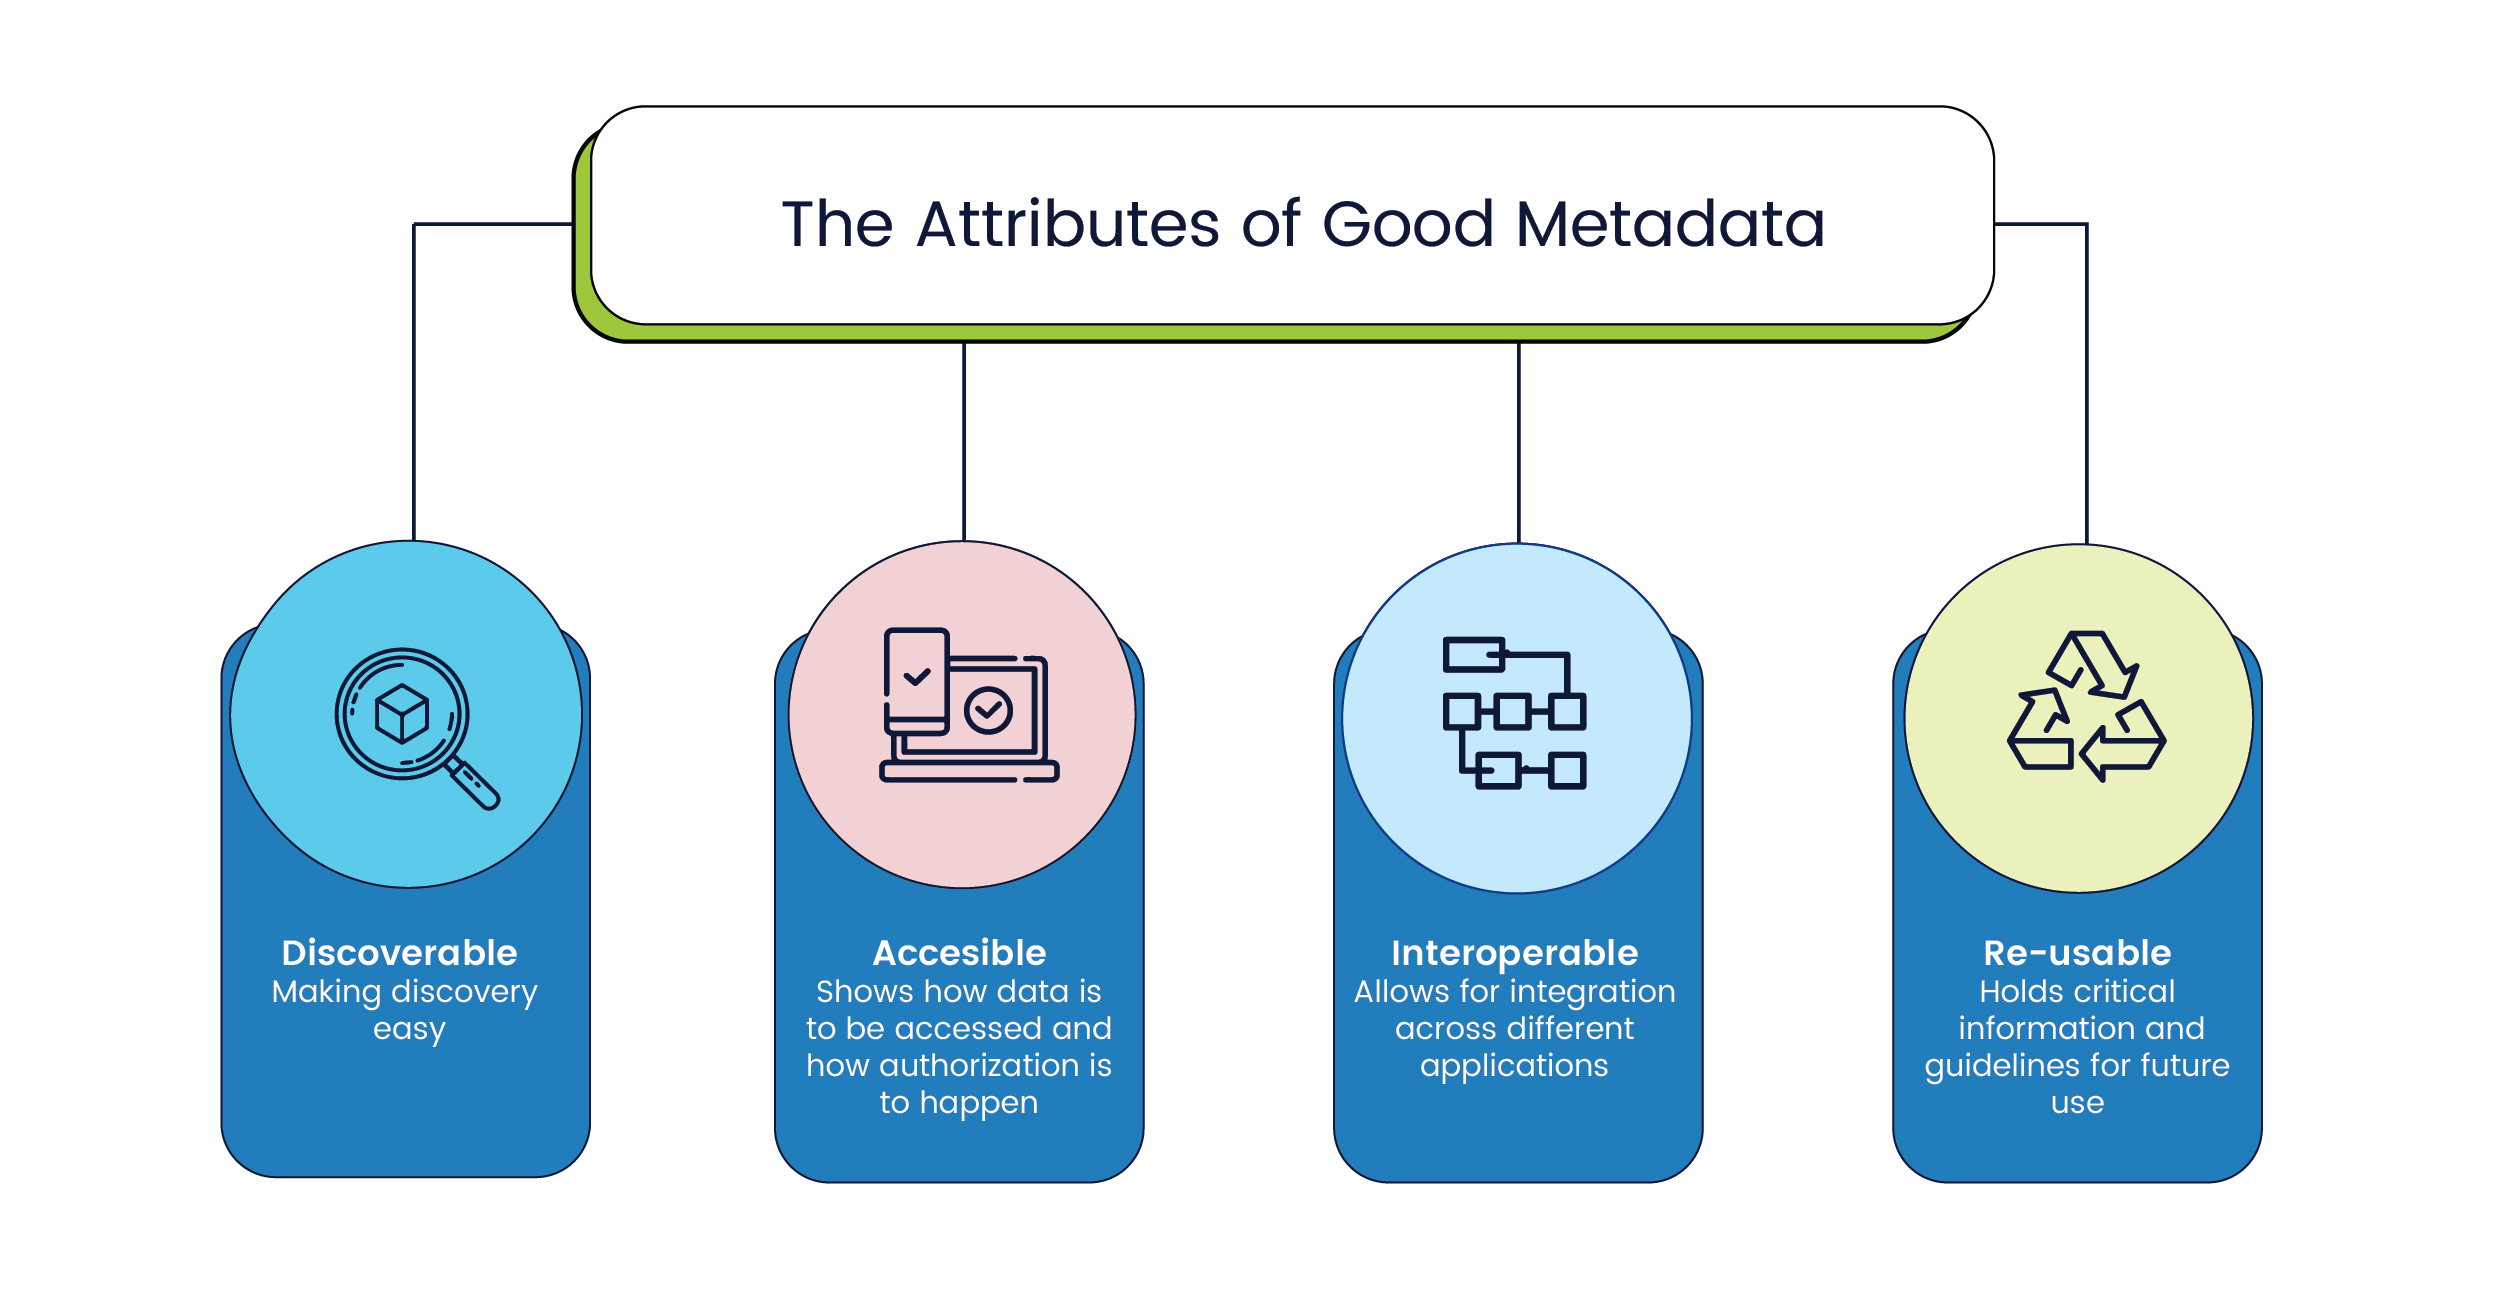 The attributes of good metadata - discoverable, accesible, interoperable, and re-usable